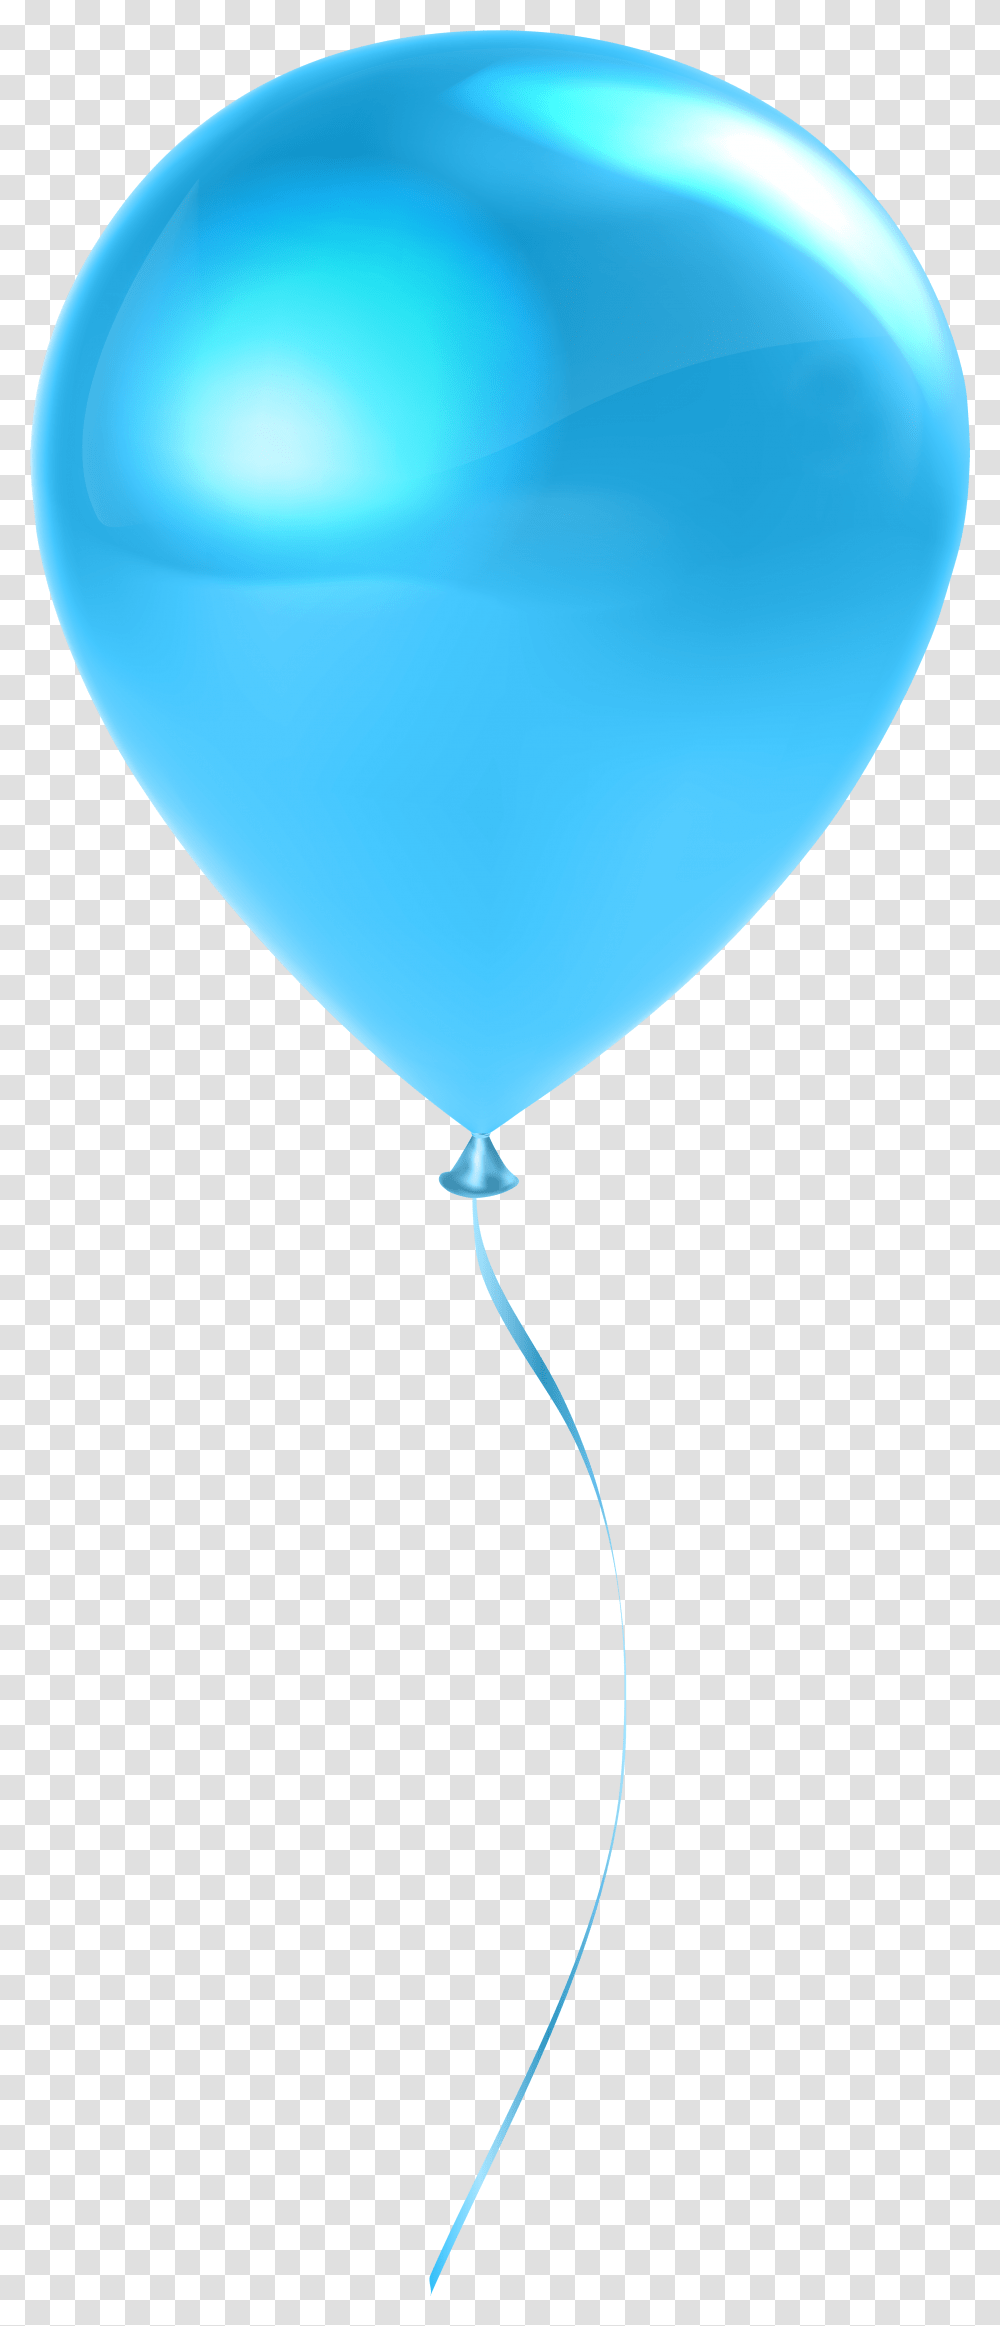 Real Balloons Blue Balloons Clipart Transparent Png